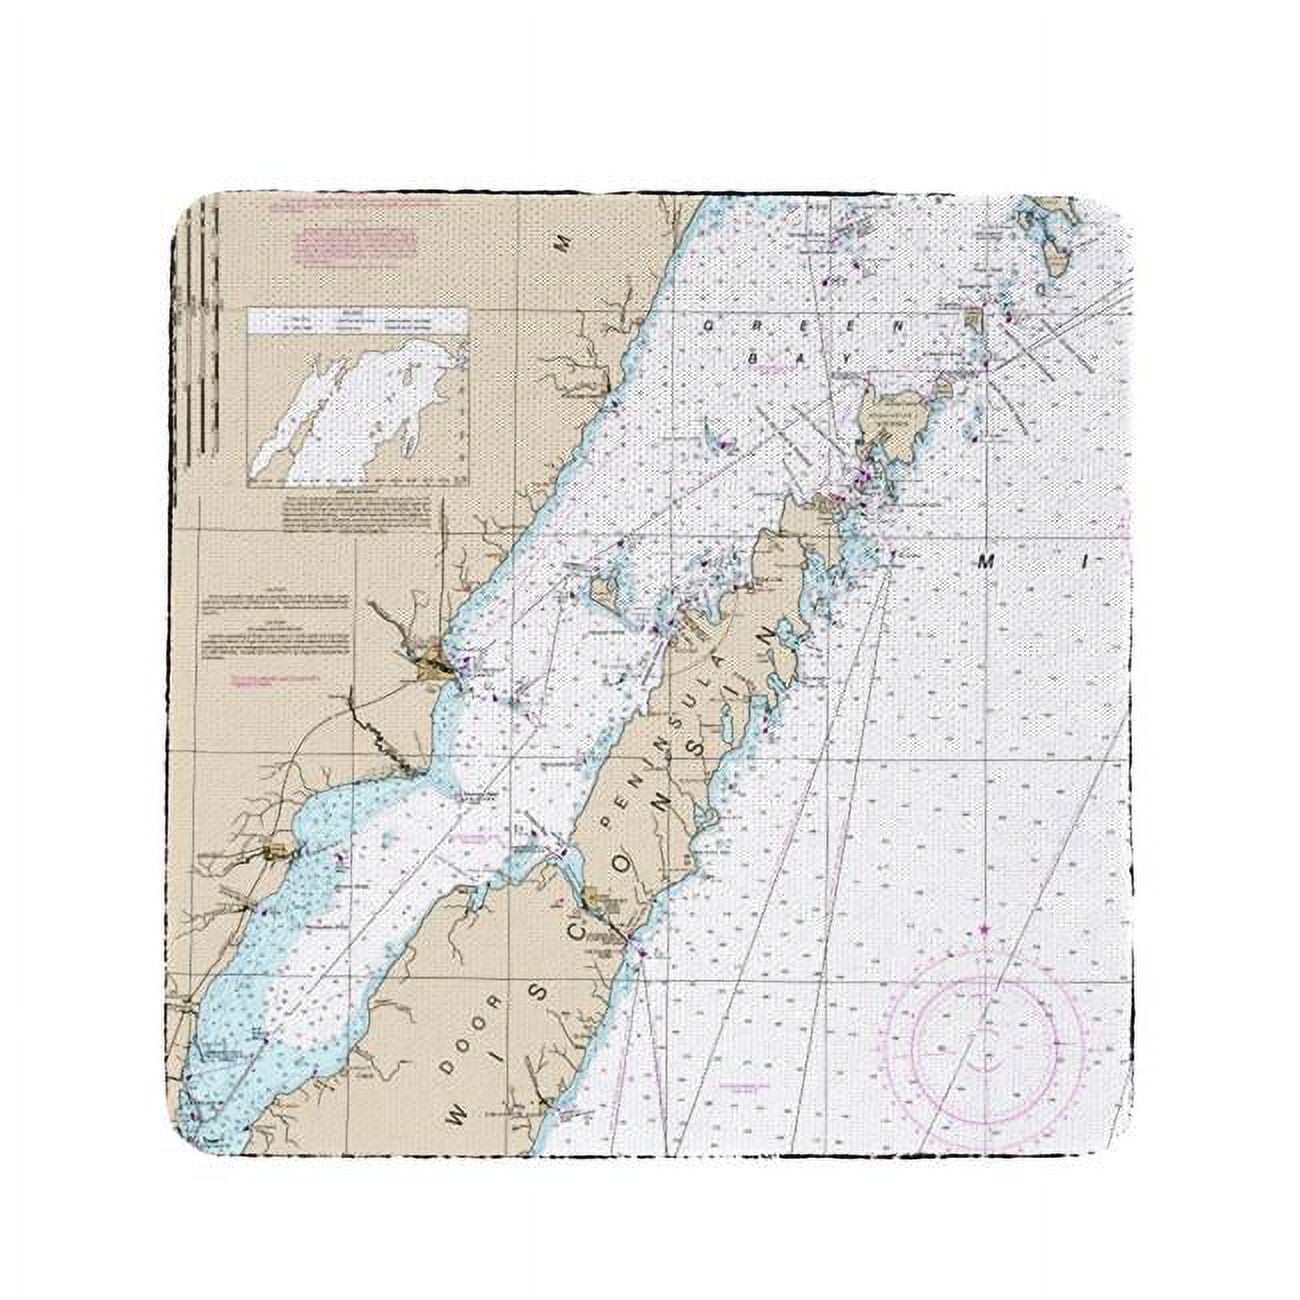 Ct14902dc 4 X 4 In. Door County, Green Bay, Wi Nautical Map Coaster - Set Of 4